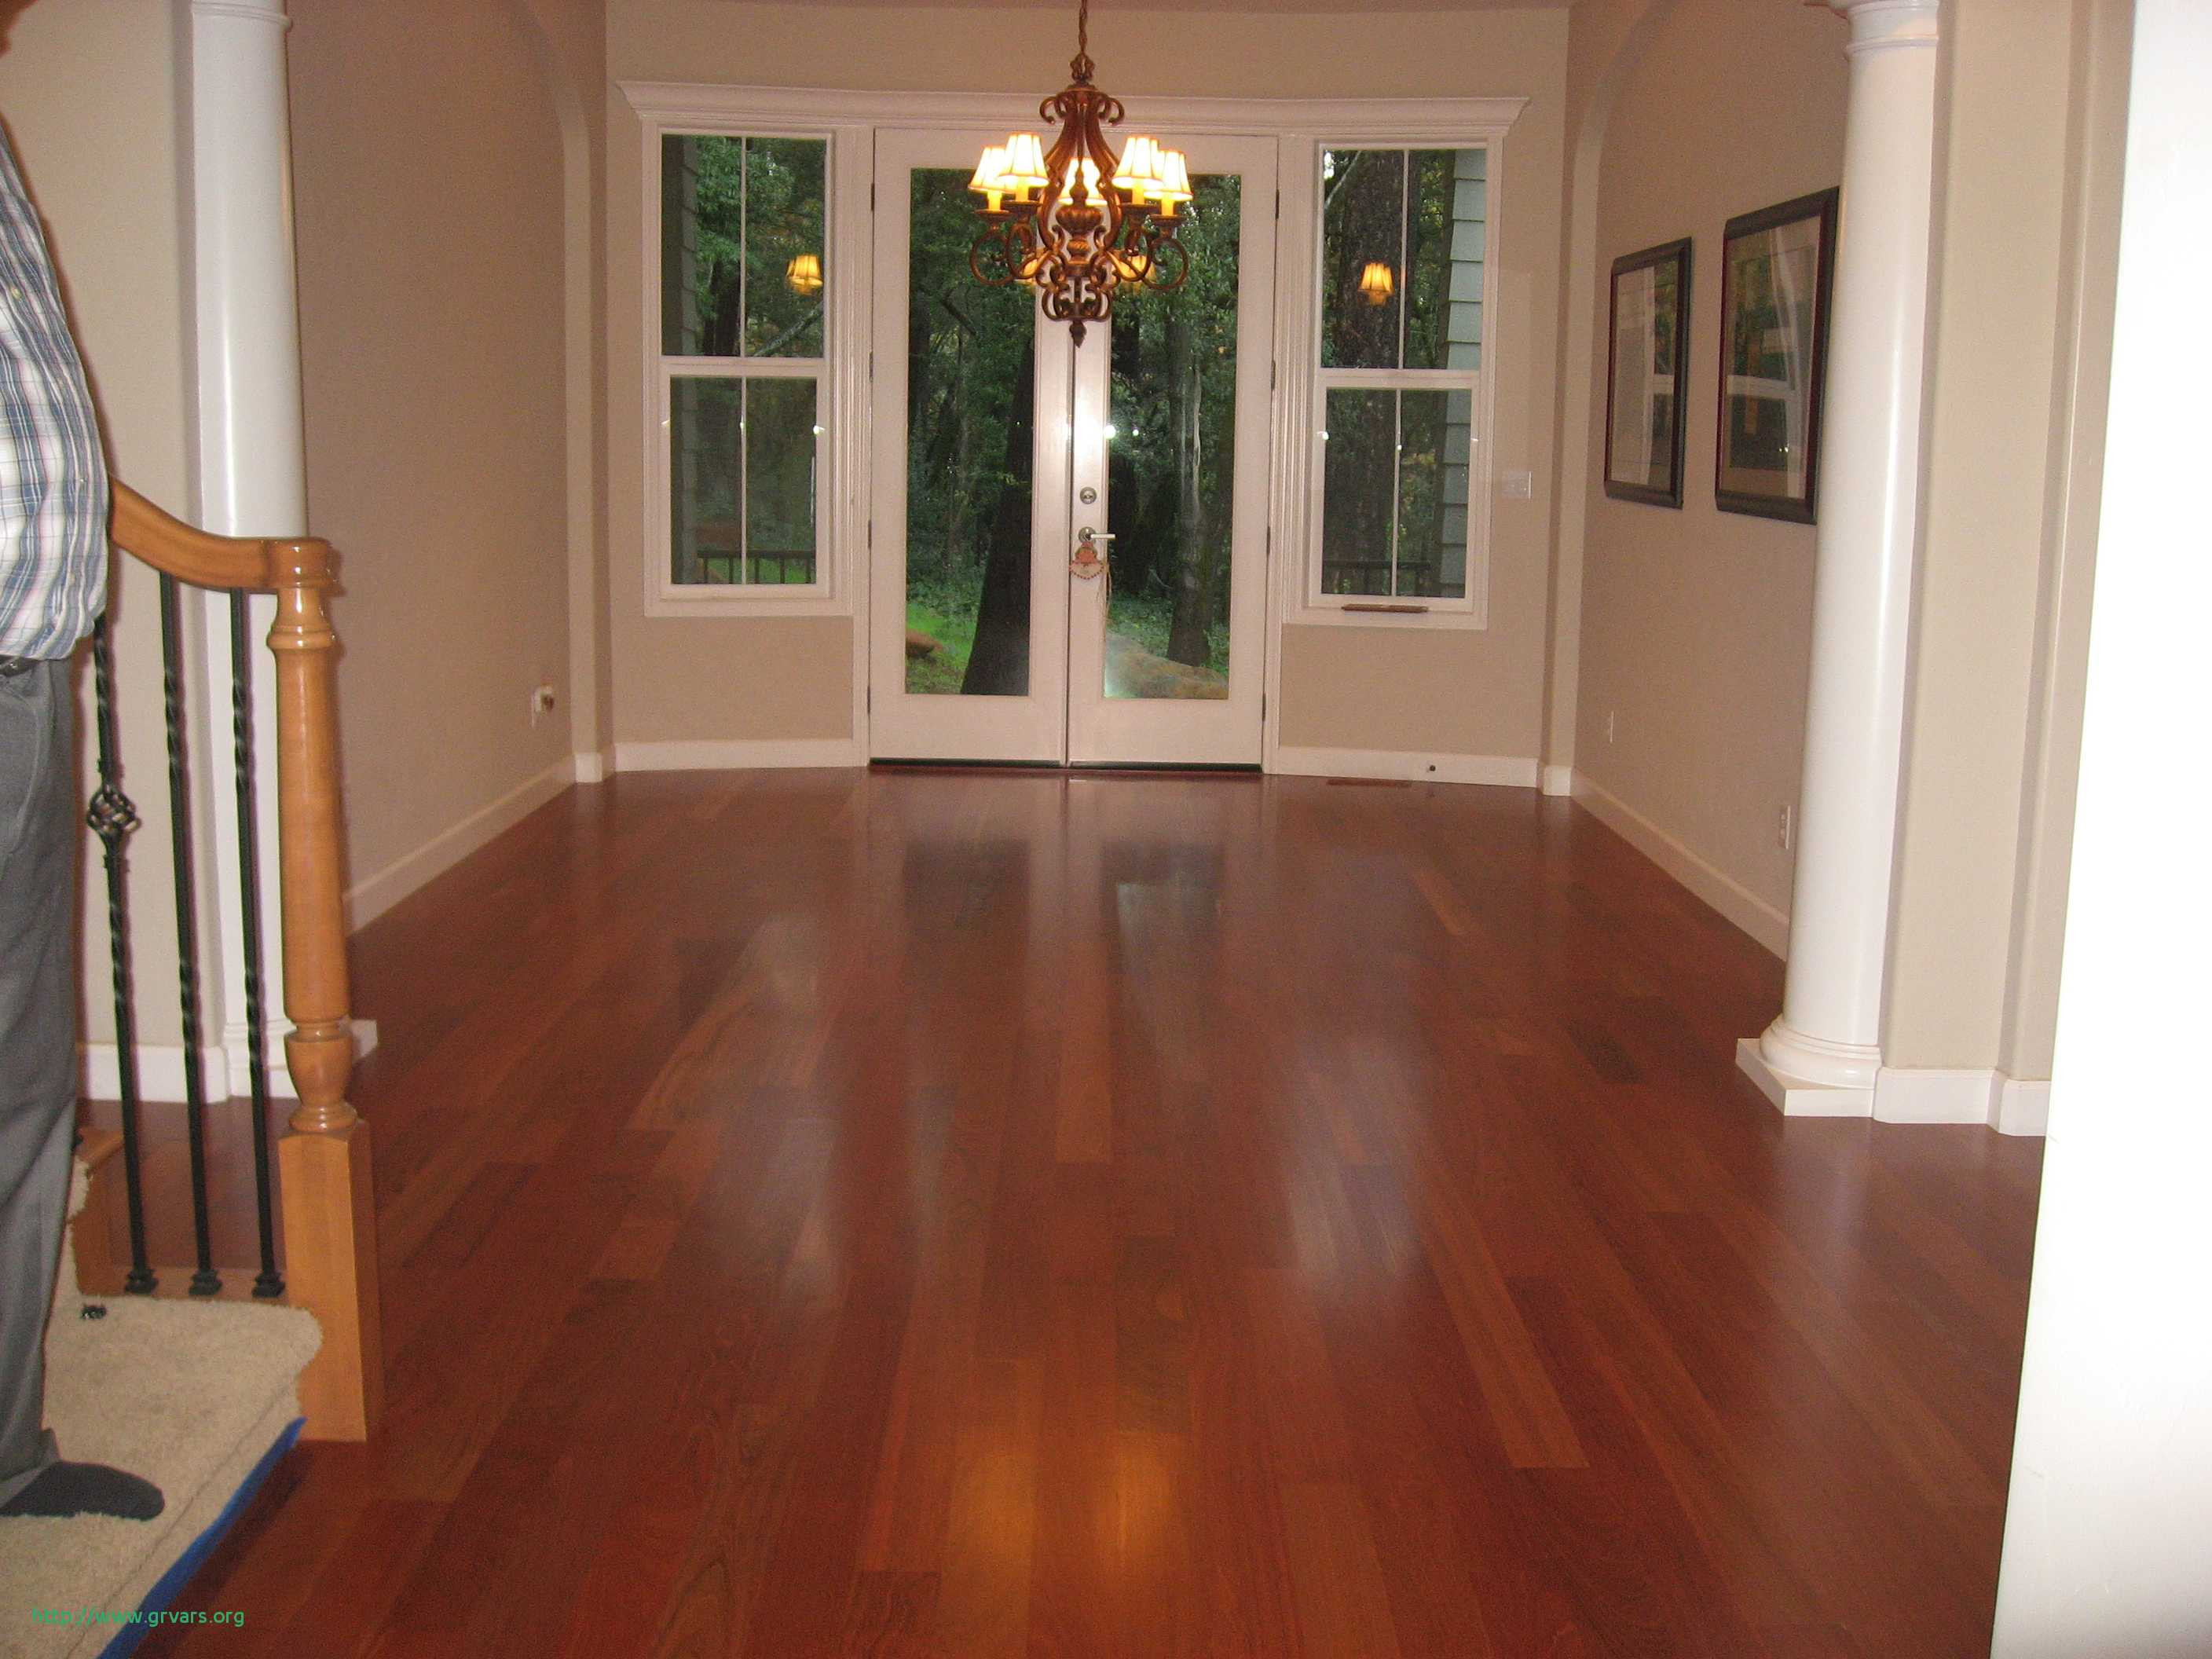 10 Recommended Painted Hardwood Floors Ideas 2024 free download painted hardwood floors ideas of 21 charmant best wall color for light wood floors ideas blog in best wall color for light wood floors beau wood floor wall paint colors wall color for